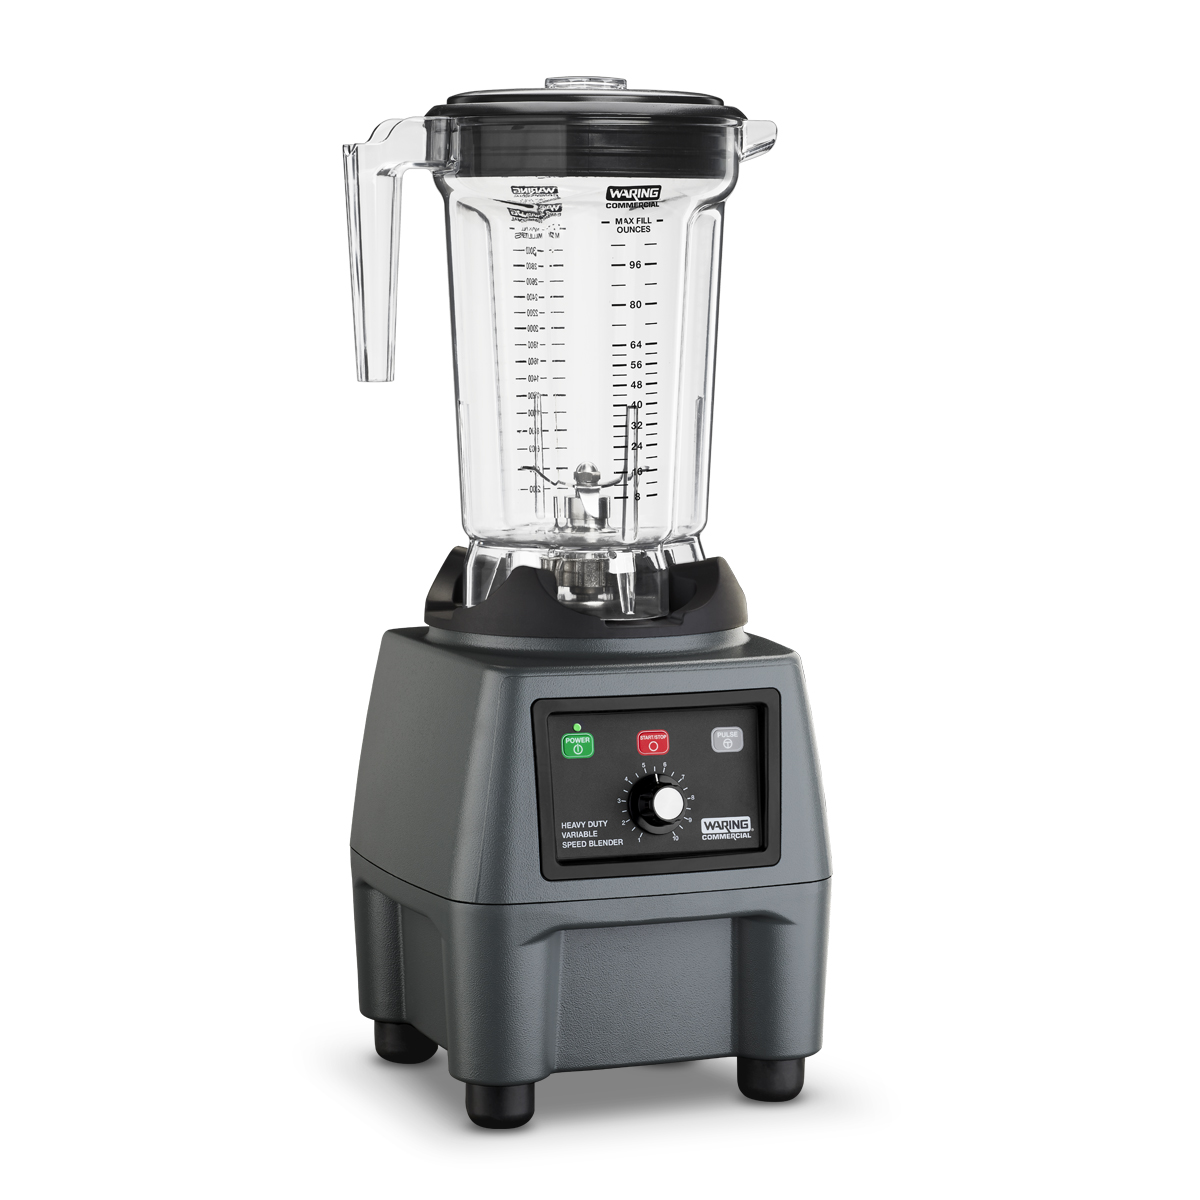 Food Blender, heavy-duty, 1 
gallon (128 oz.) capacity, 
variable speed, electronic 
controls, removable Tritan 
copolyester container &amp; rubber 
lid, stainless steel blade &amp; 
coupling system, die-cast 
housing, rubber feet, 3-3/4 
HP, 1.8kW, 120v/60/1-ph, 15.0 
amps, cord, NEMA 5-15P, NSF, 
cETLus, Made in USA 1/21

For Customer Care &amp; Product 
Service, please contact:
(800) 269-6640
waring_service@conair.com